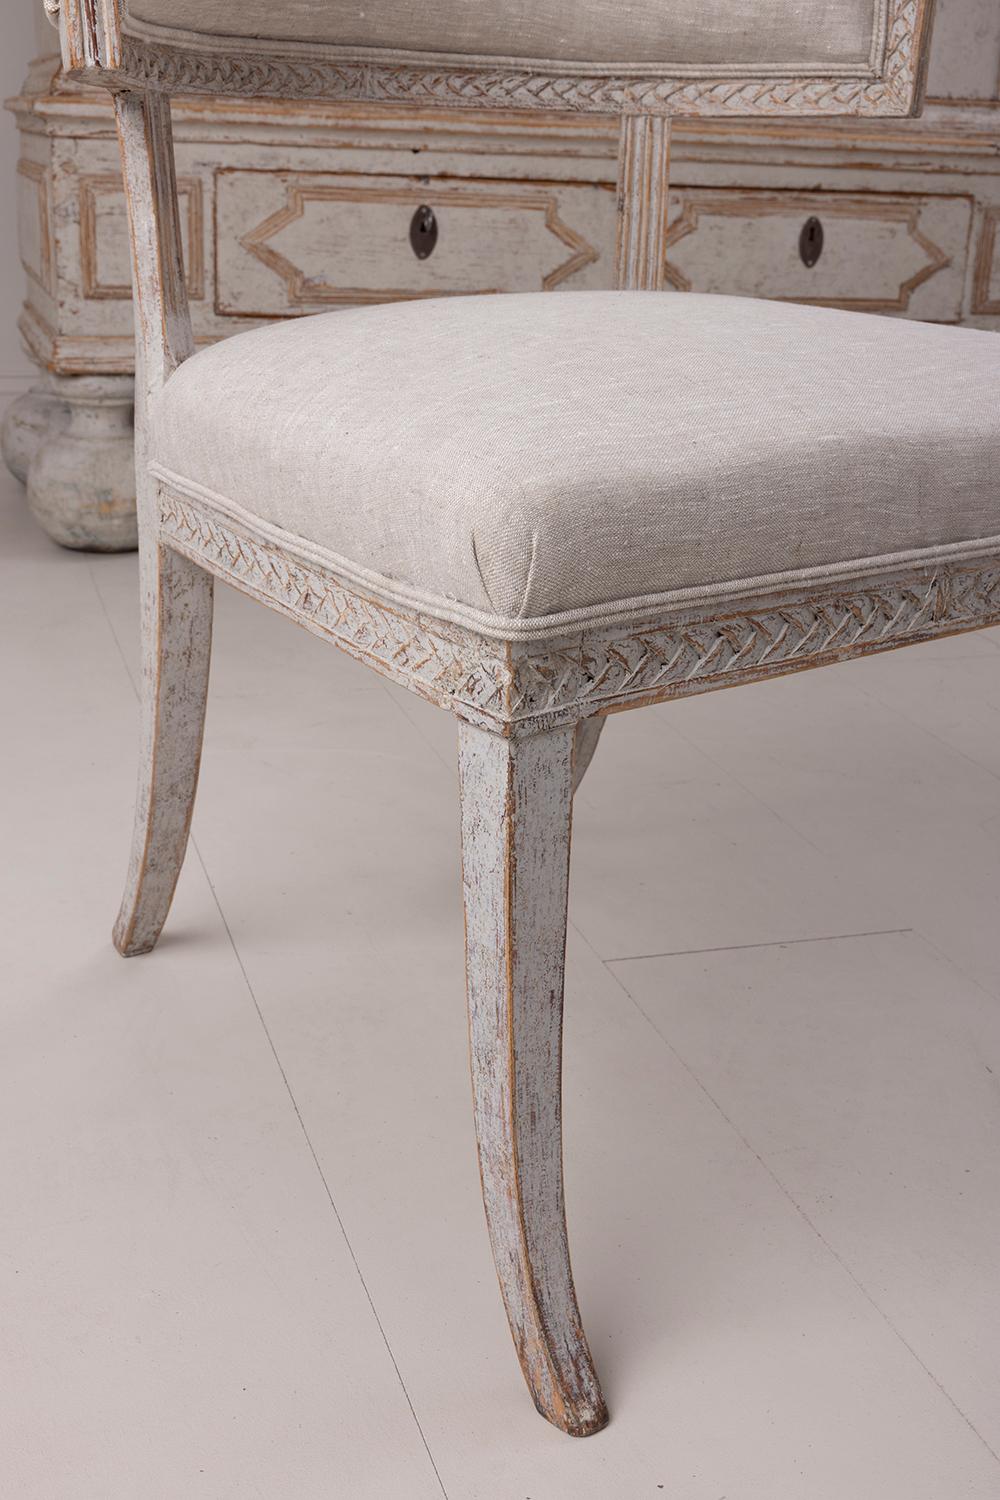 19th C. Swedish Gustavian Period Upholstered and Painted Klismos Chair For Sale 1